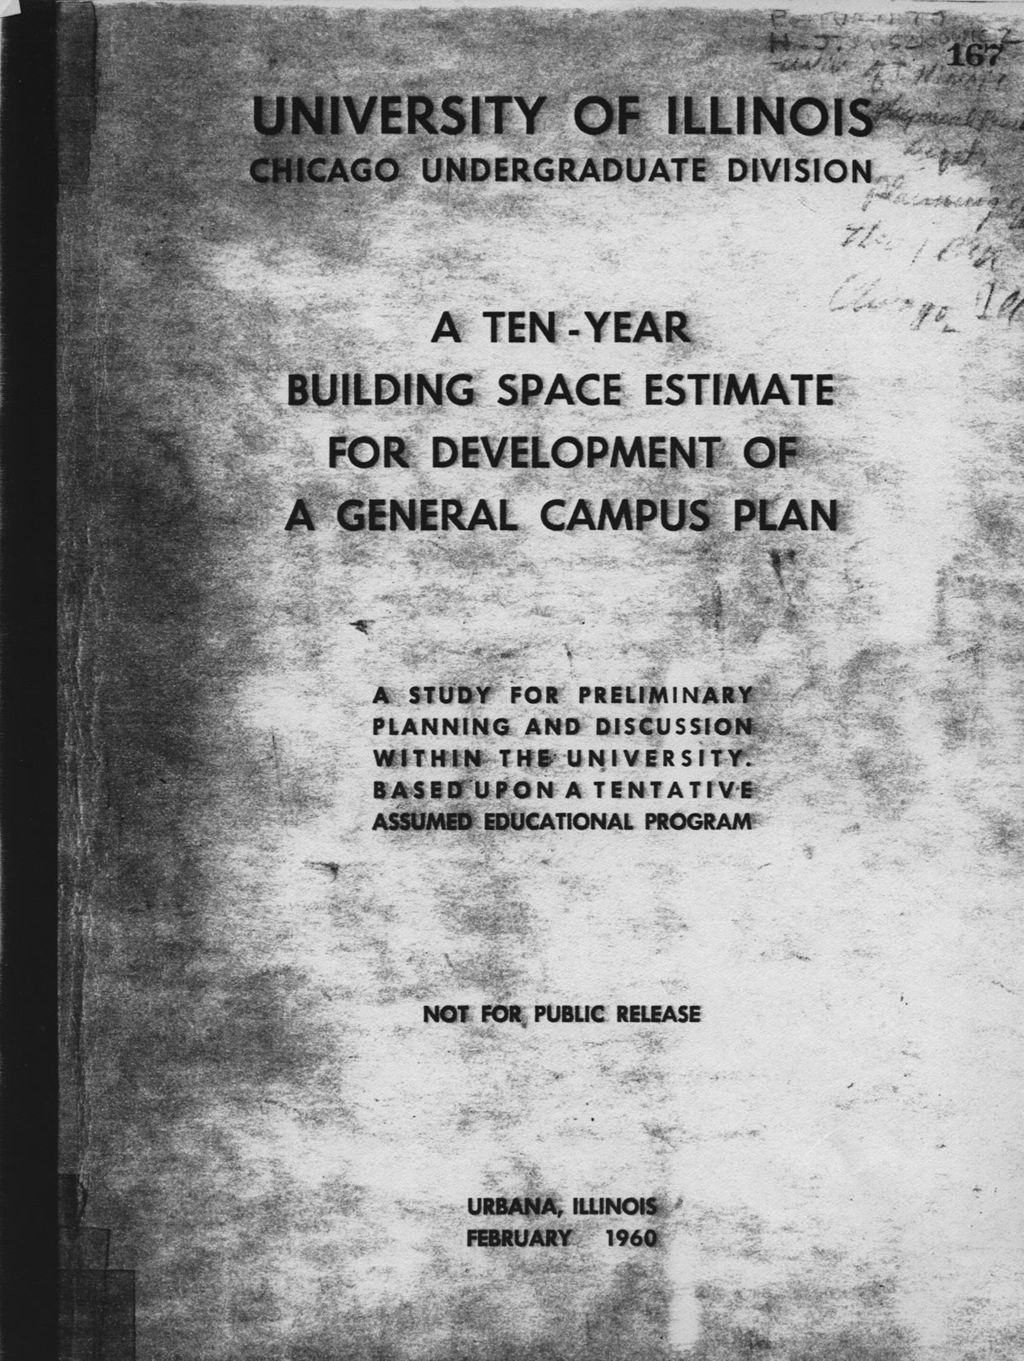 A Ten-Year Building Space Estimate for Development of a General Campus Plan, University of Illinois, Chicago Undergraduate Division